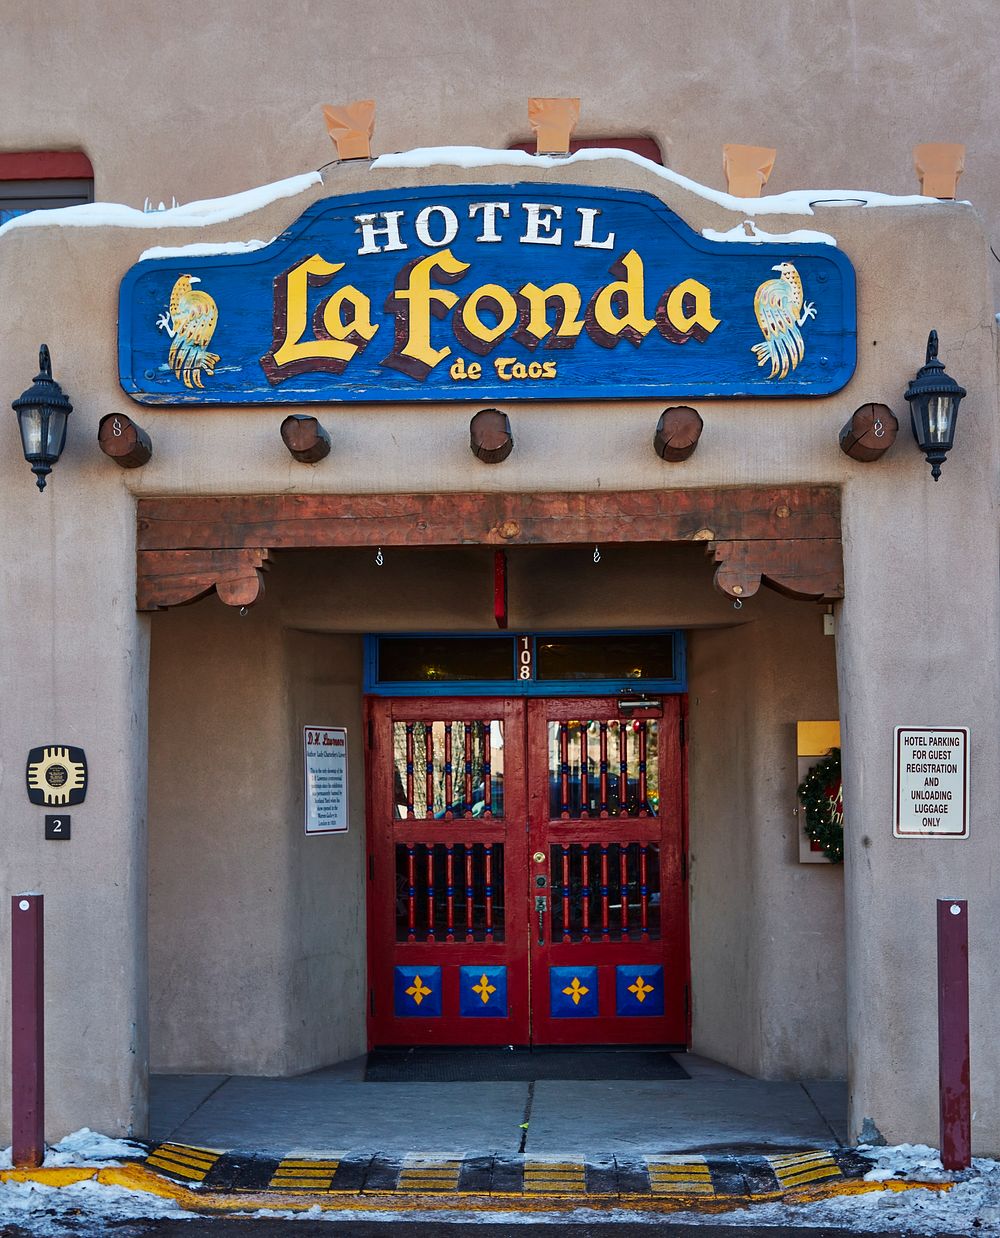                         Entrance to the La Fonda de Taos Hotel on the plaza, or town square, in Taos, New Mexico, once a…